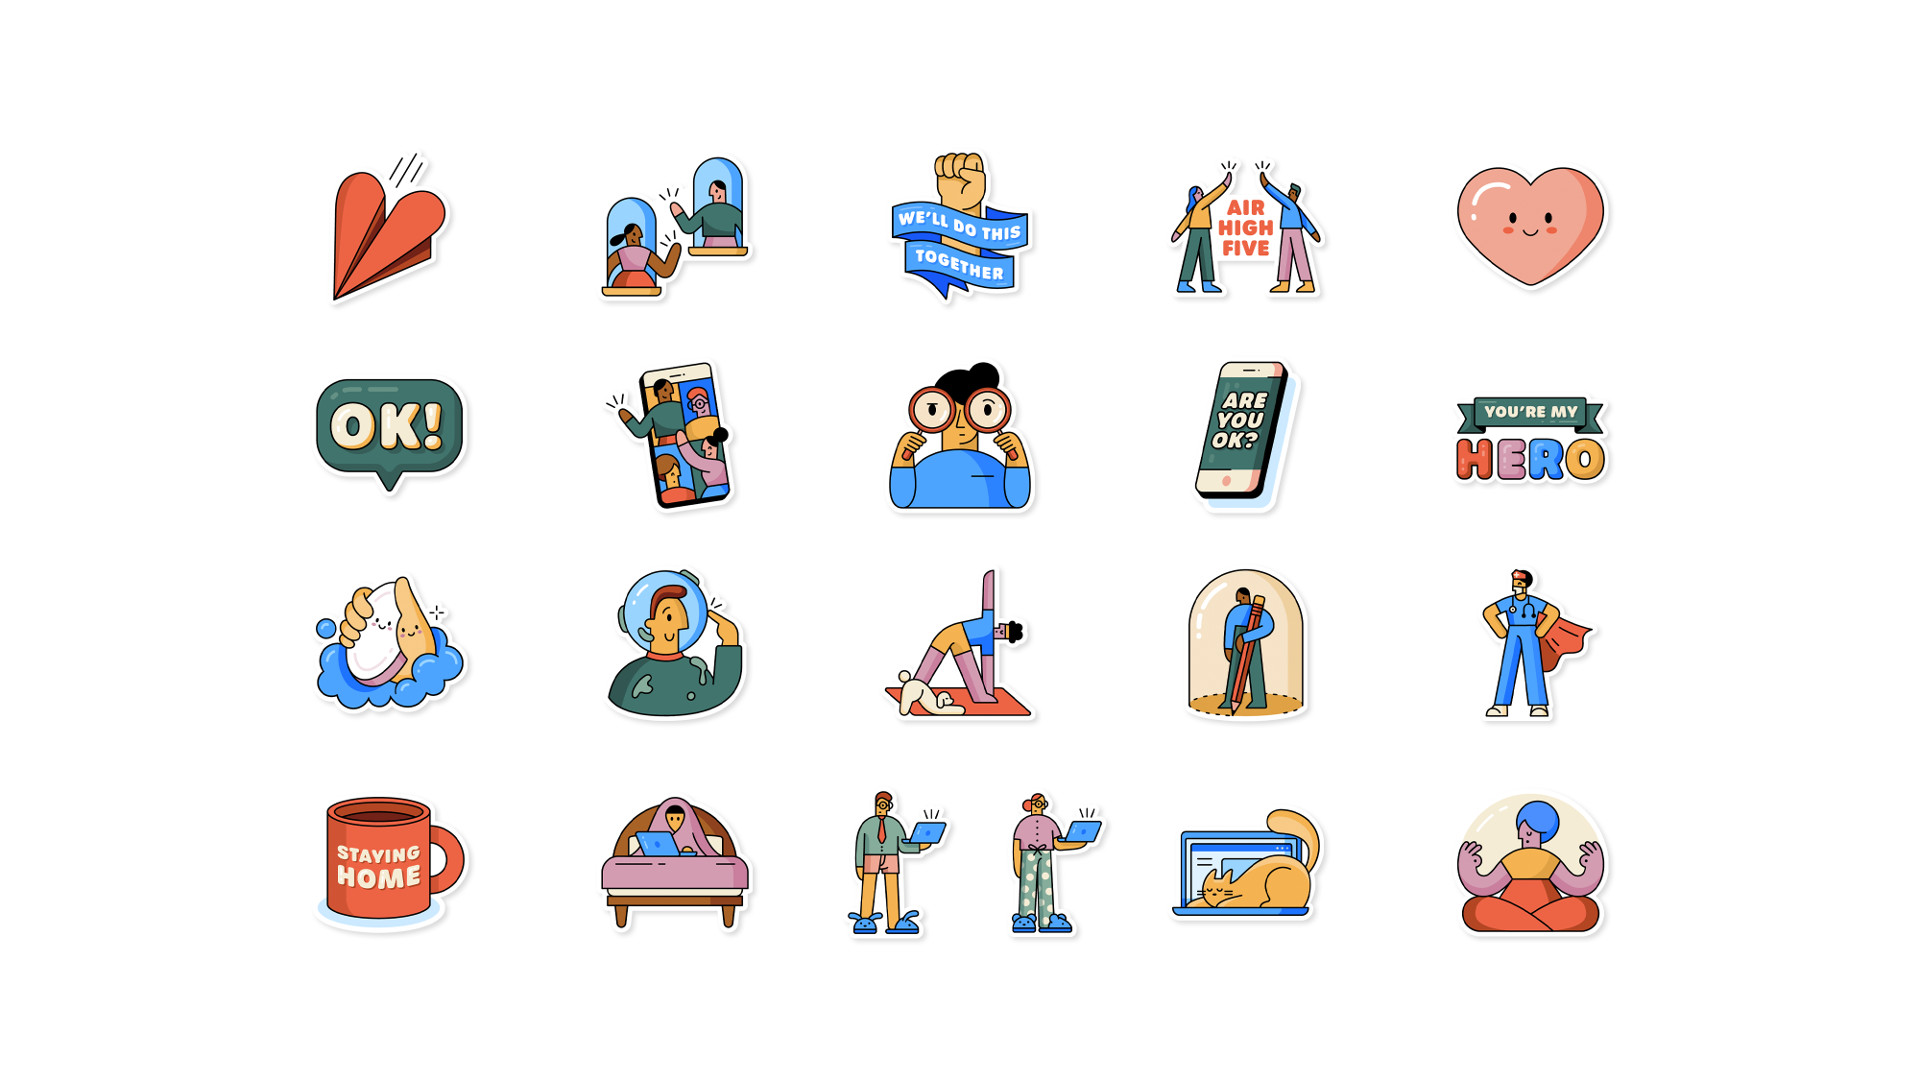 The WhatsApp Together at Home sticker pack.